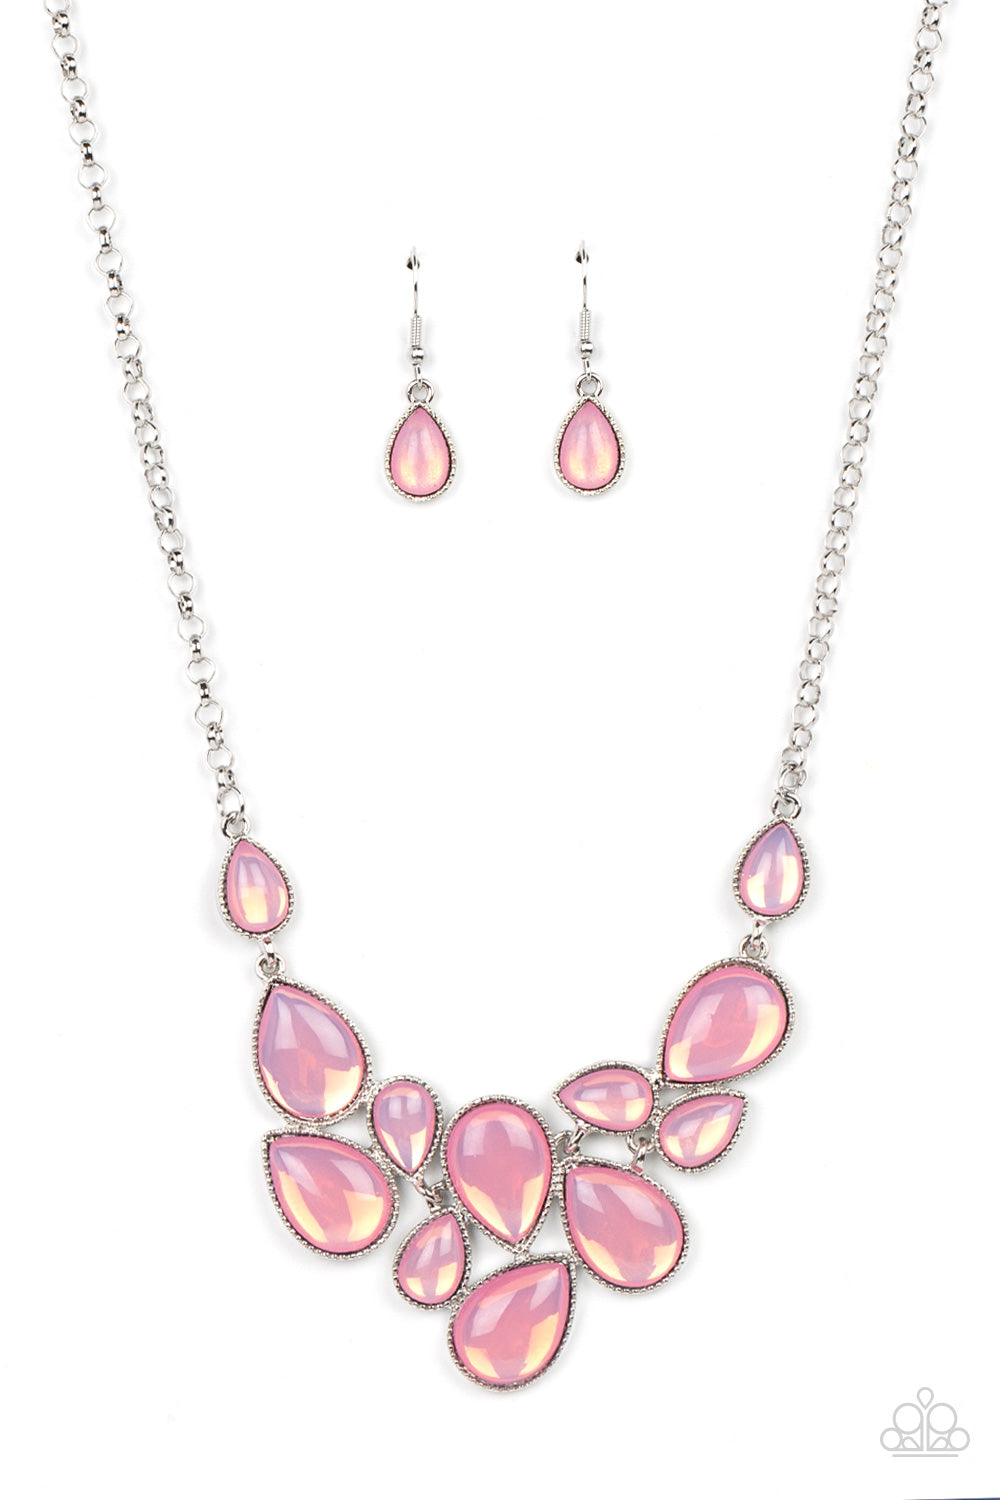 Keeps GLOWING and GLOWING - Pink Paparazzi Necklace